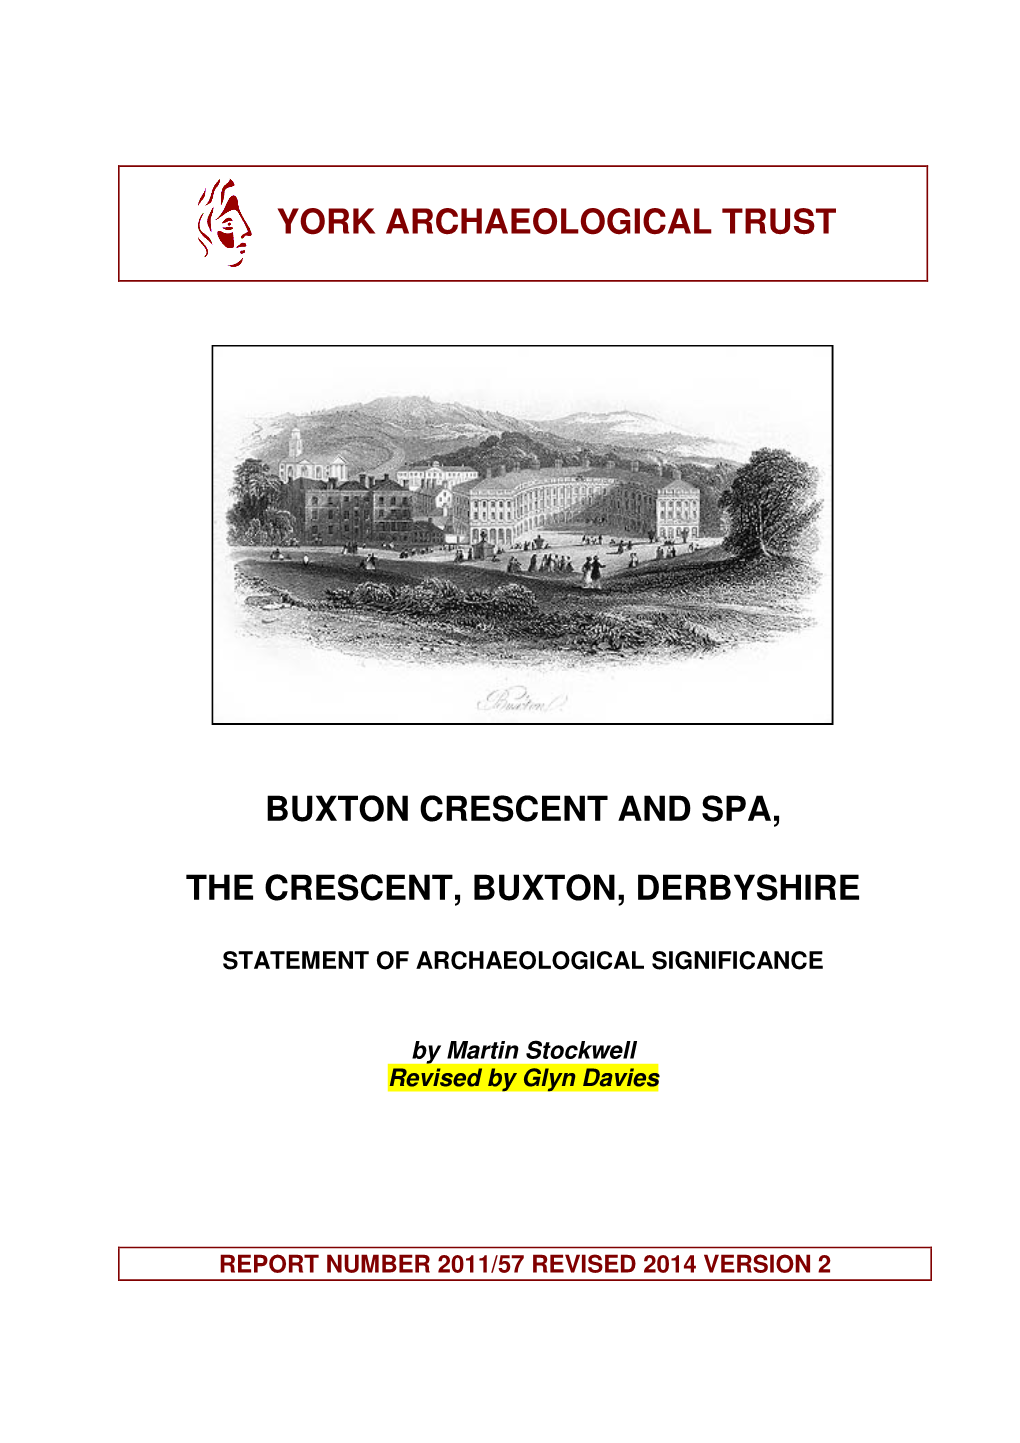 York Archaeological Trust Buxton Crescent and Spa